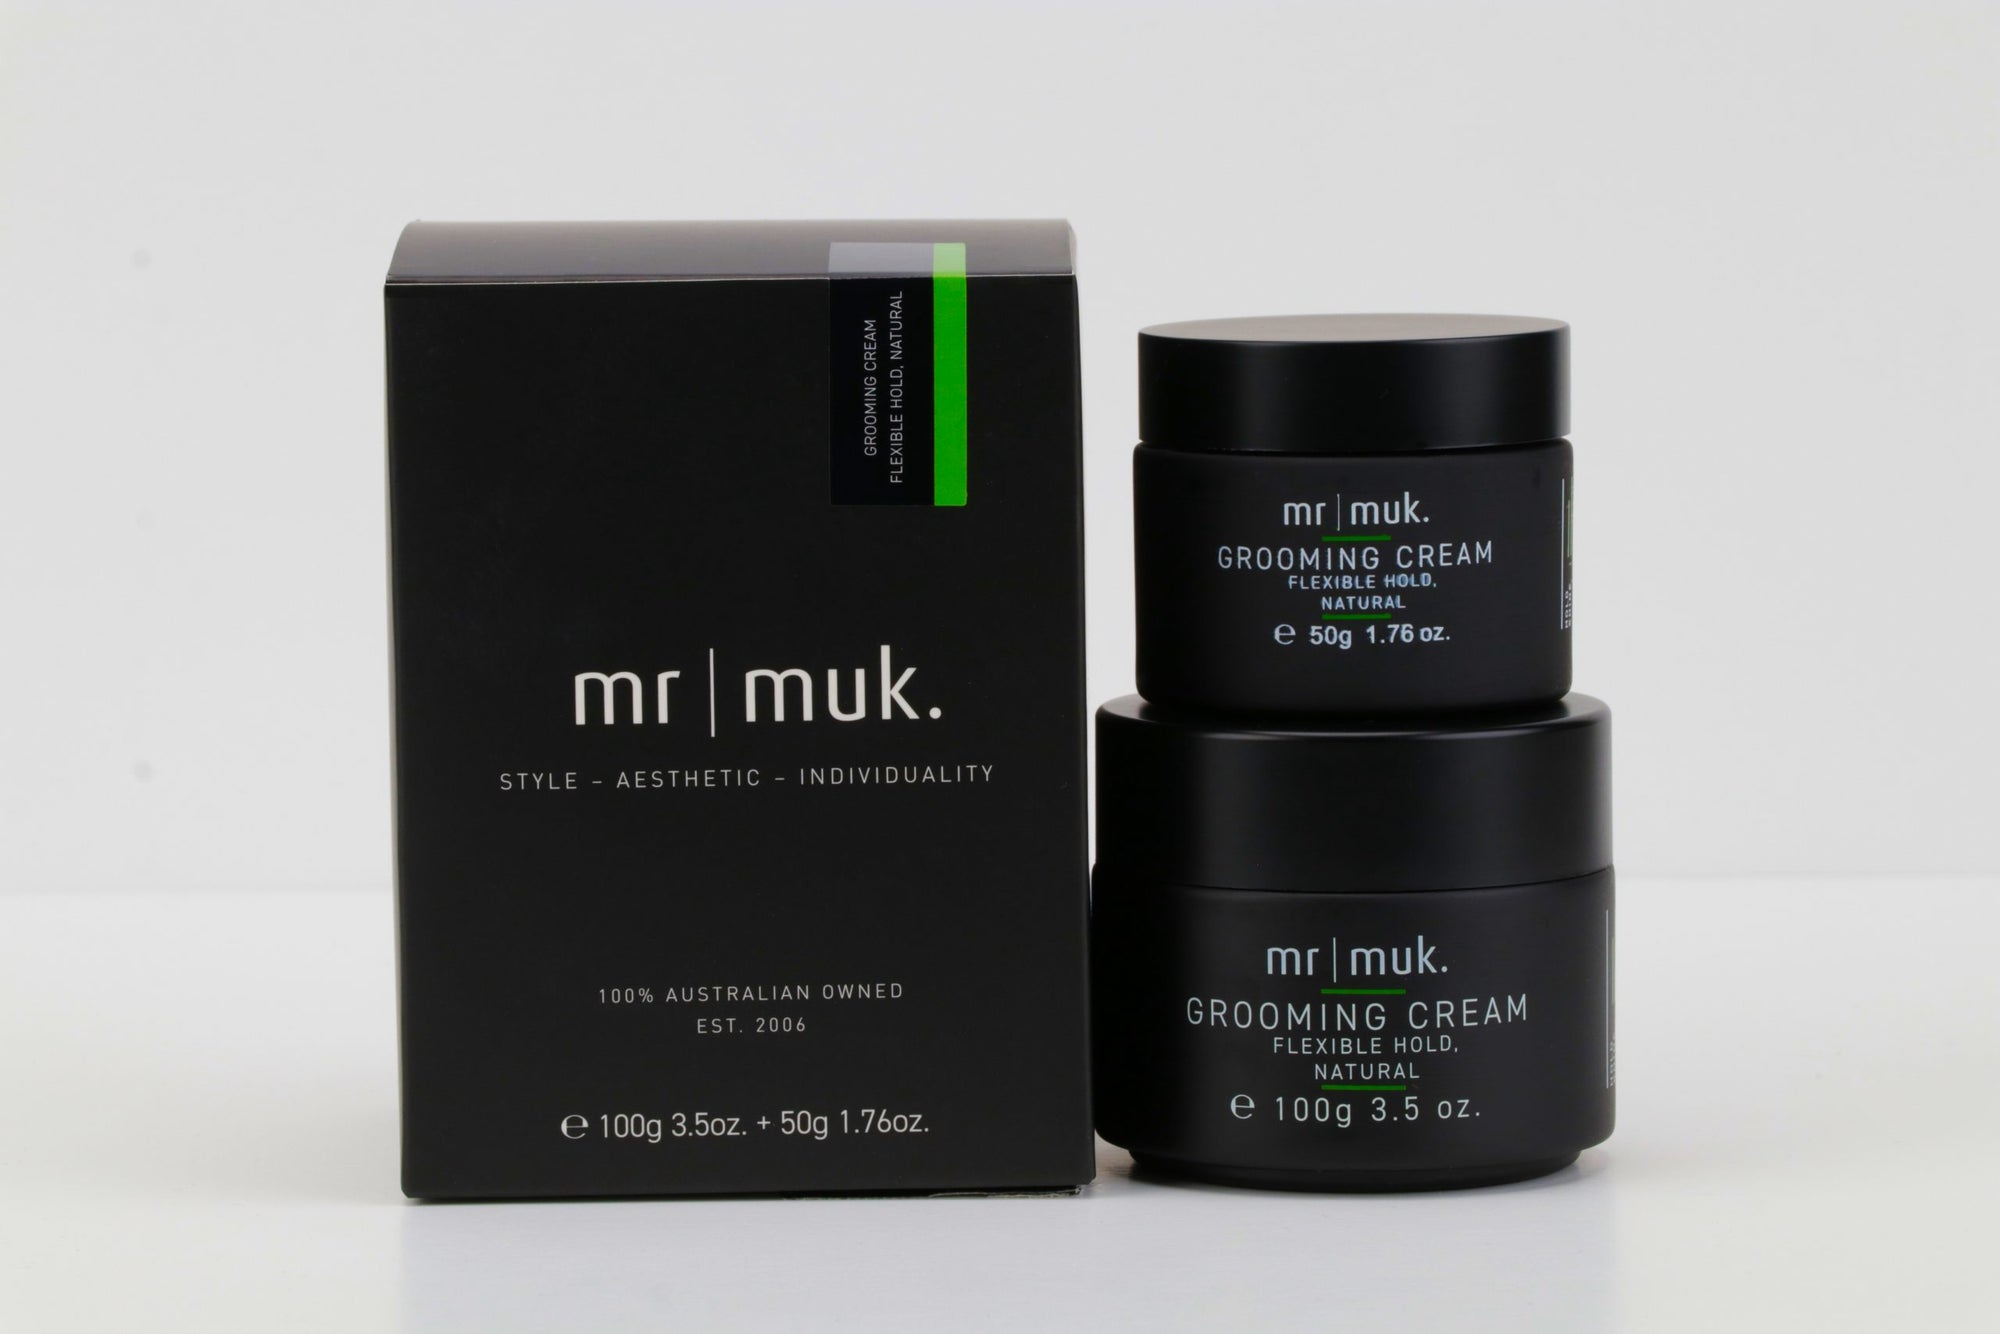 Duo Pack Muk Grooming Cream Flexible Hold Natural